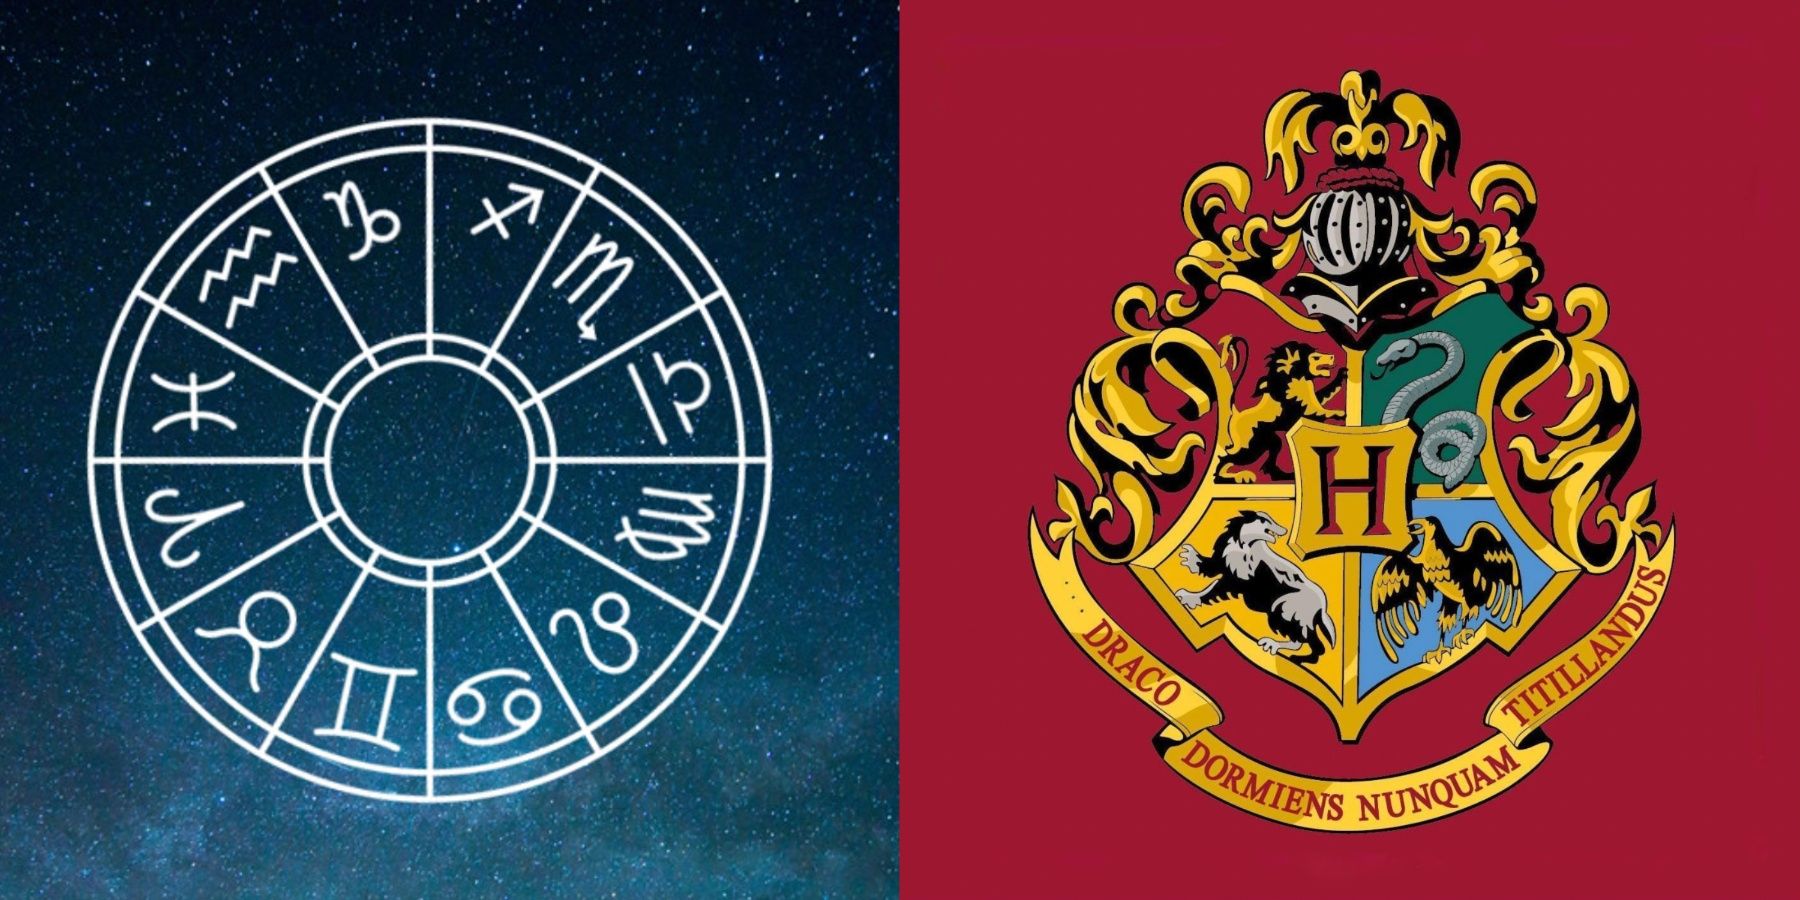 Side by side images depict a Western zodiac wheel and the Hogwarts school crest from Harry Potter